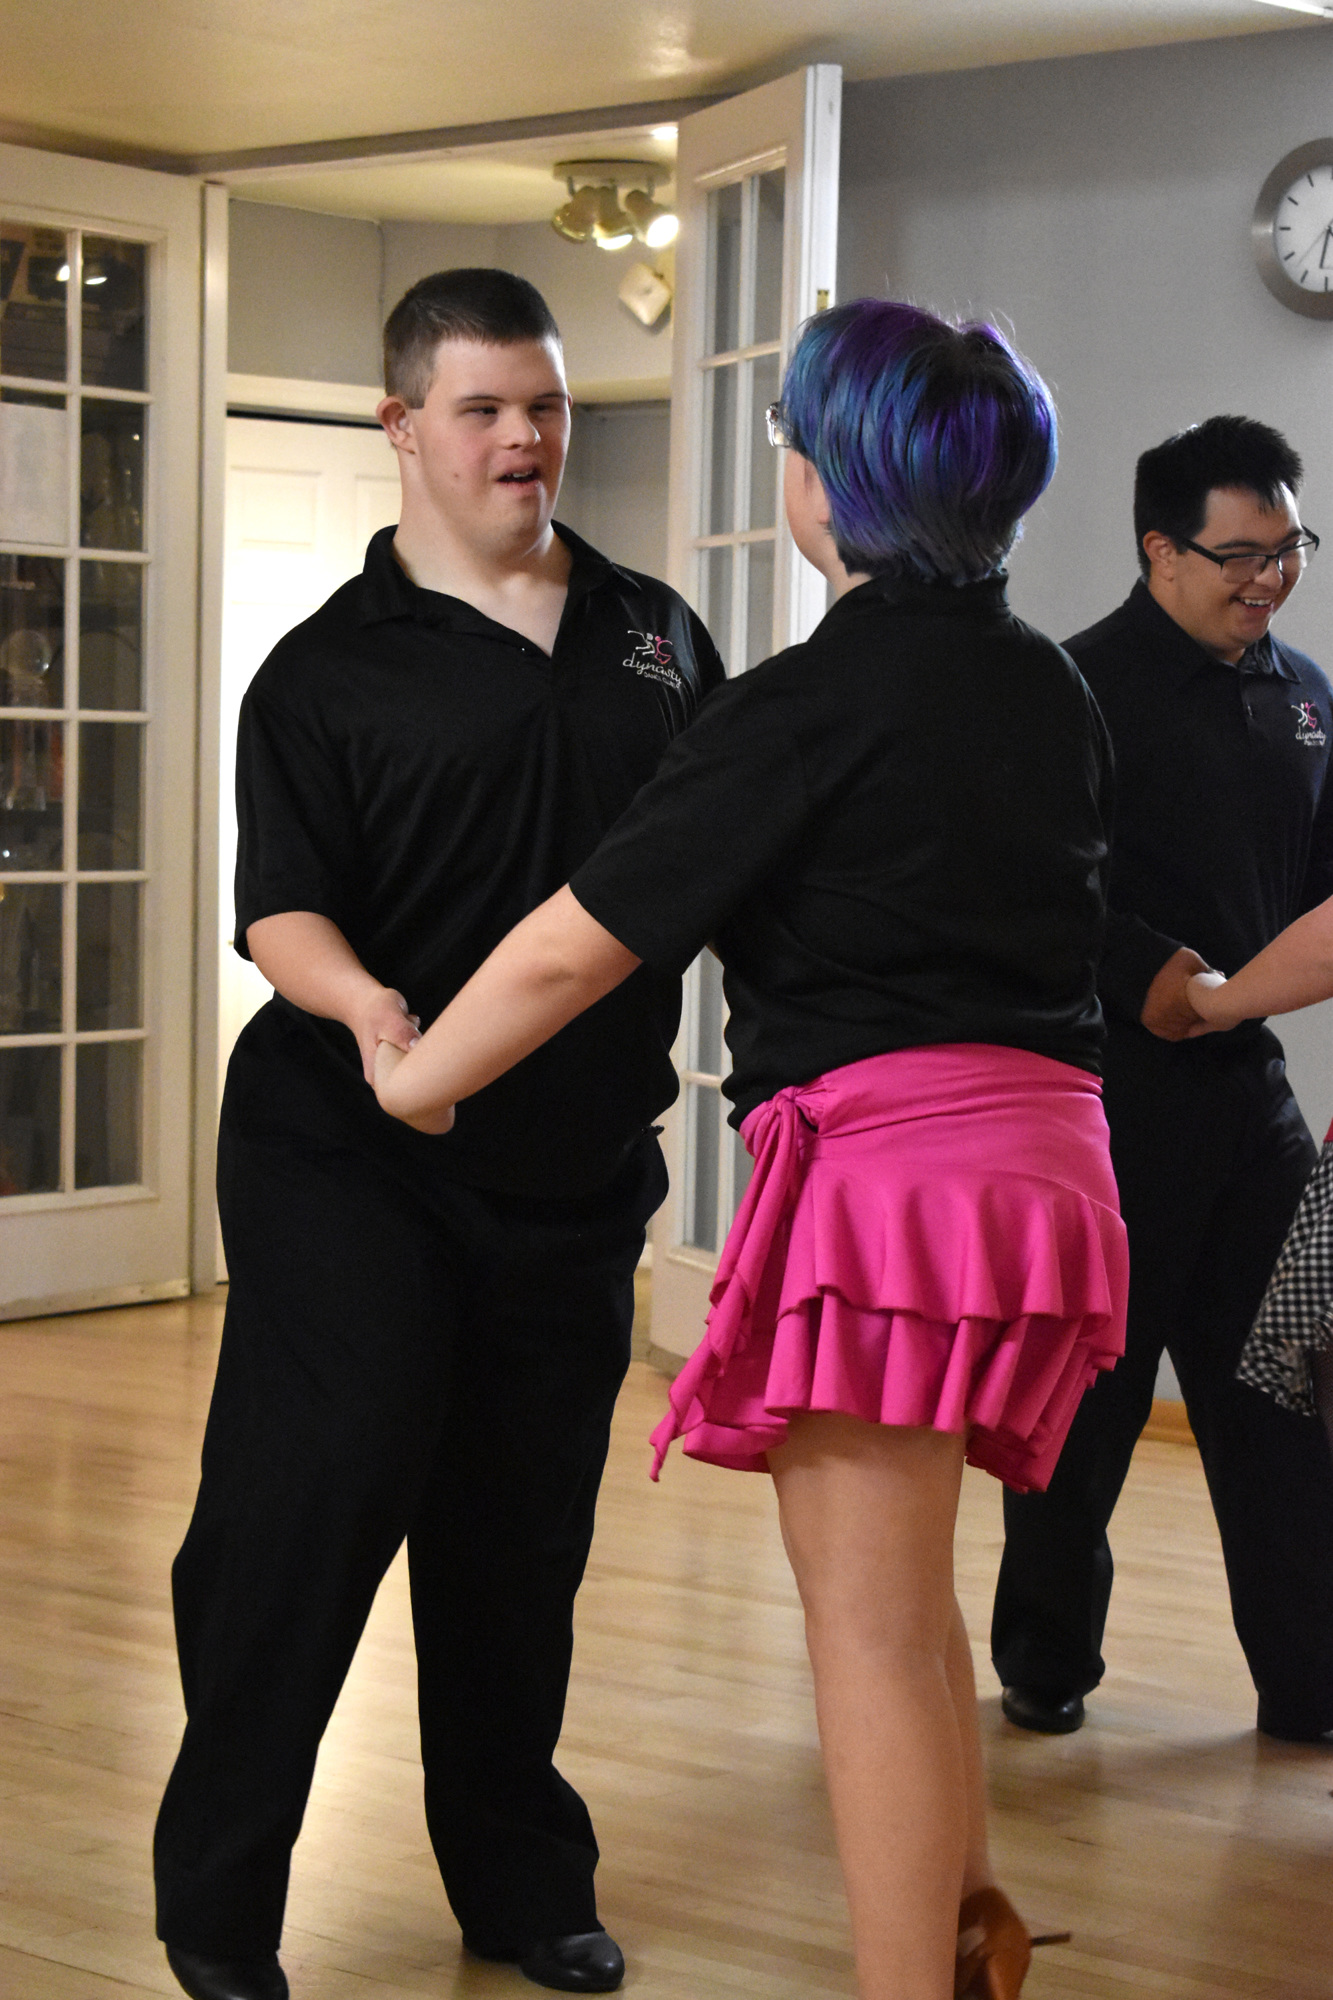 Students Cody and Emily practice their moves during a Monday night class. Photo by Niki Kottmann